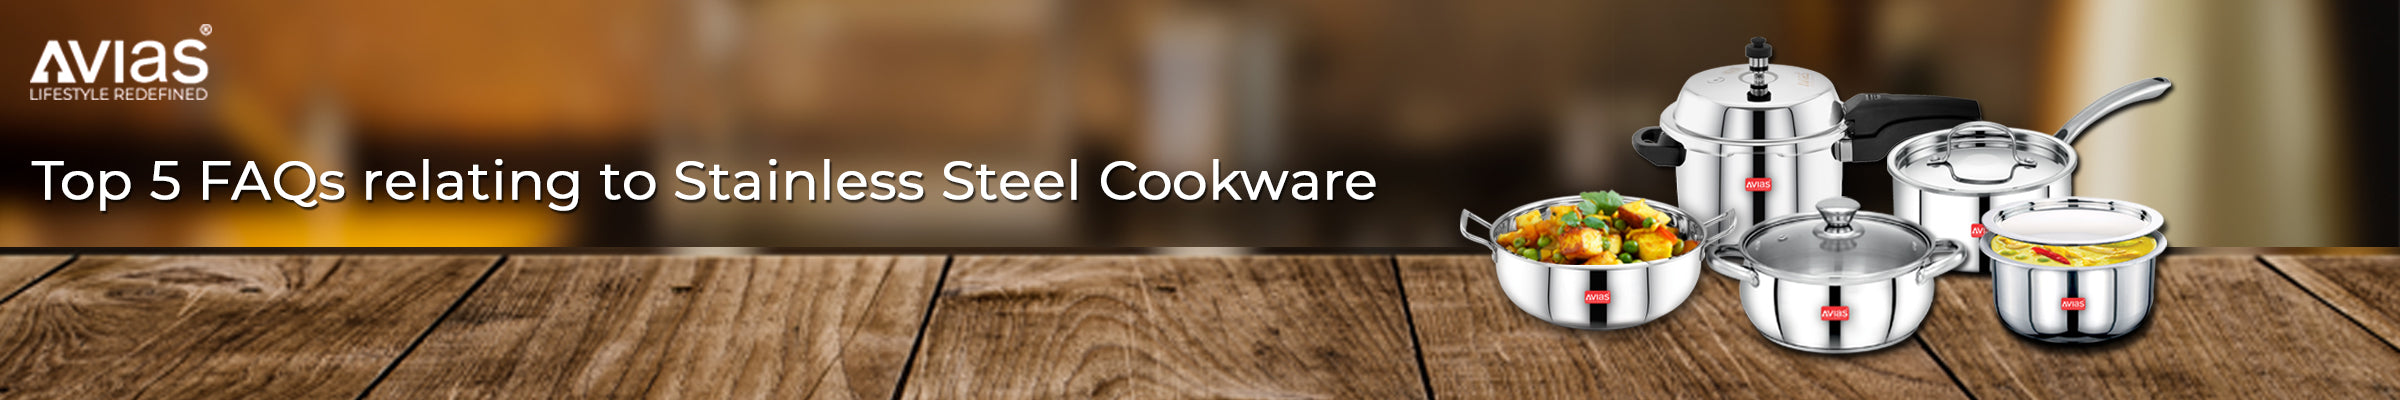 Frequently Asked Questions About Stainless Steel Cookware from Avias